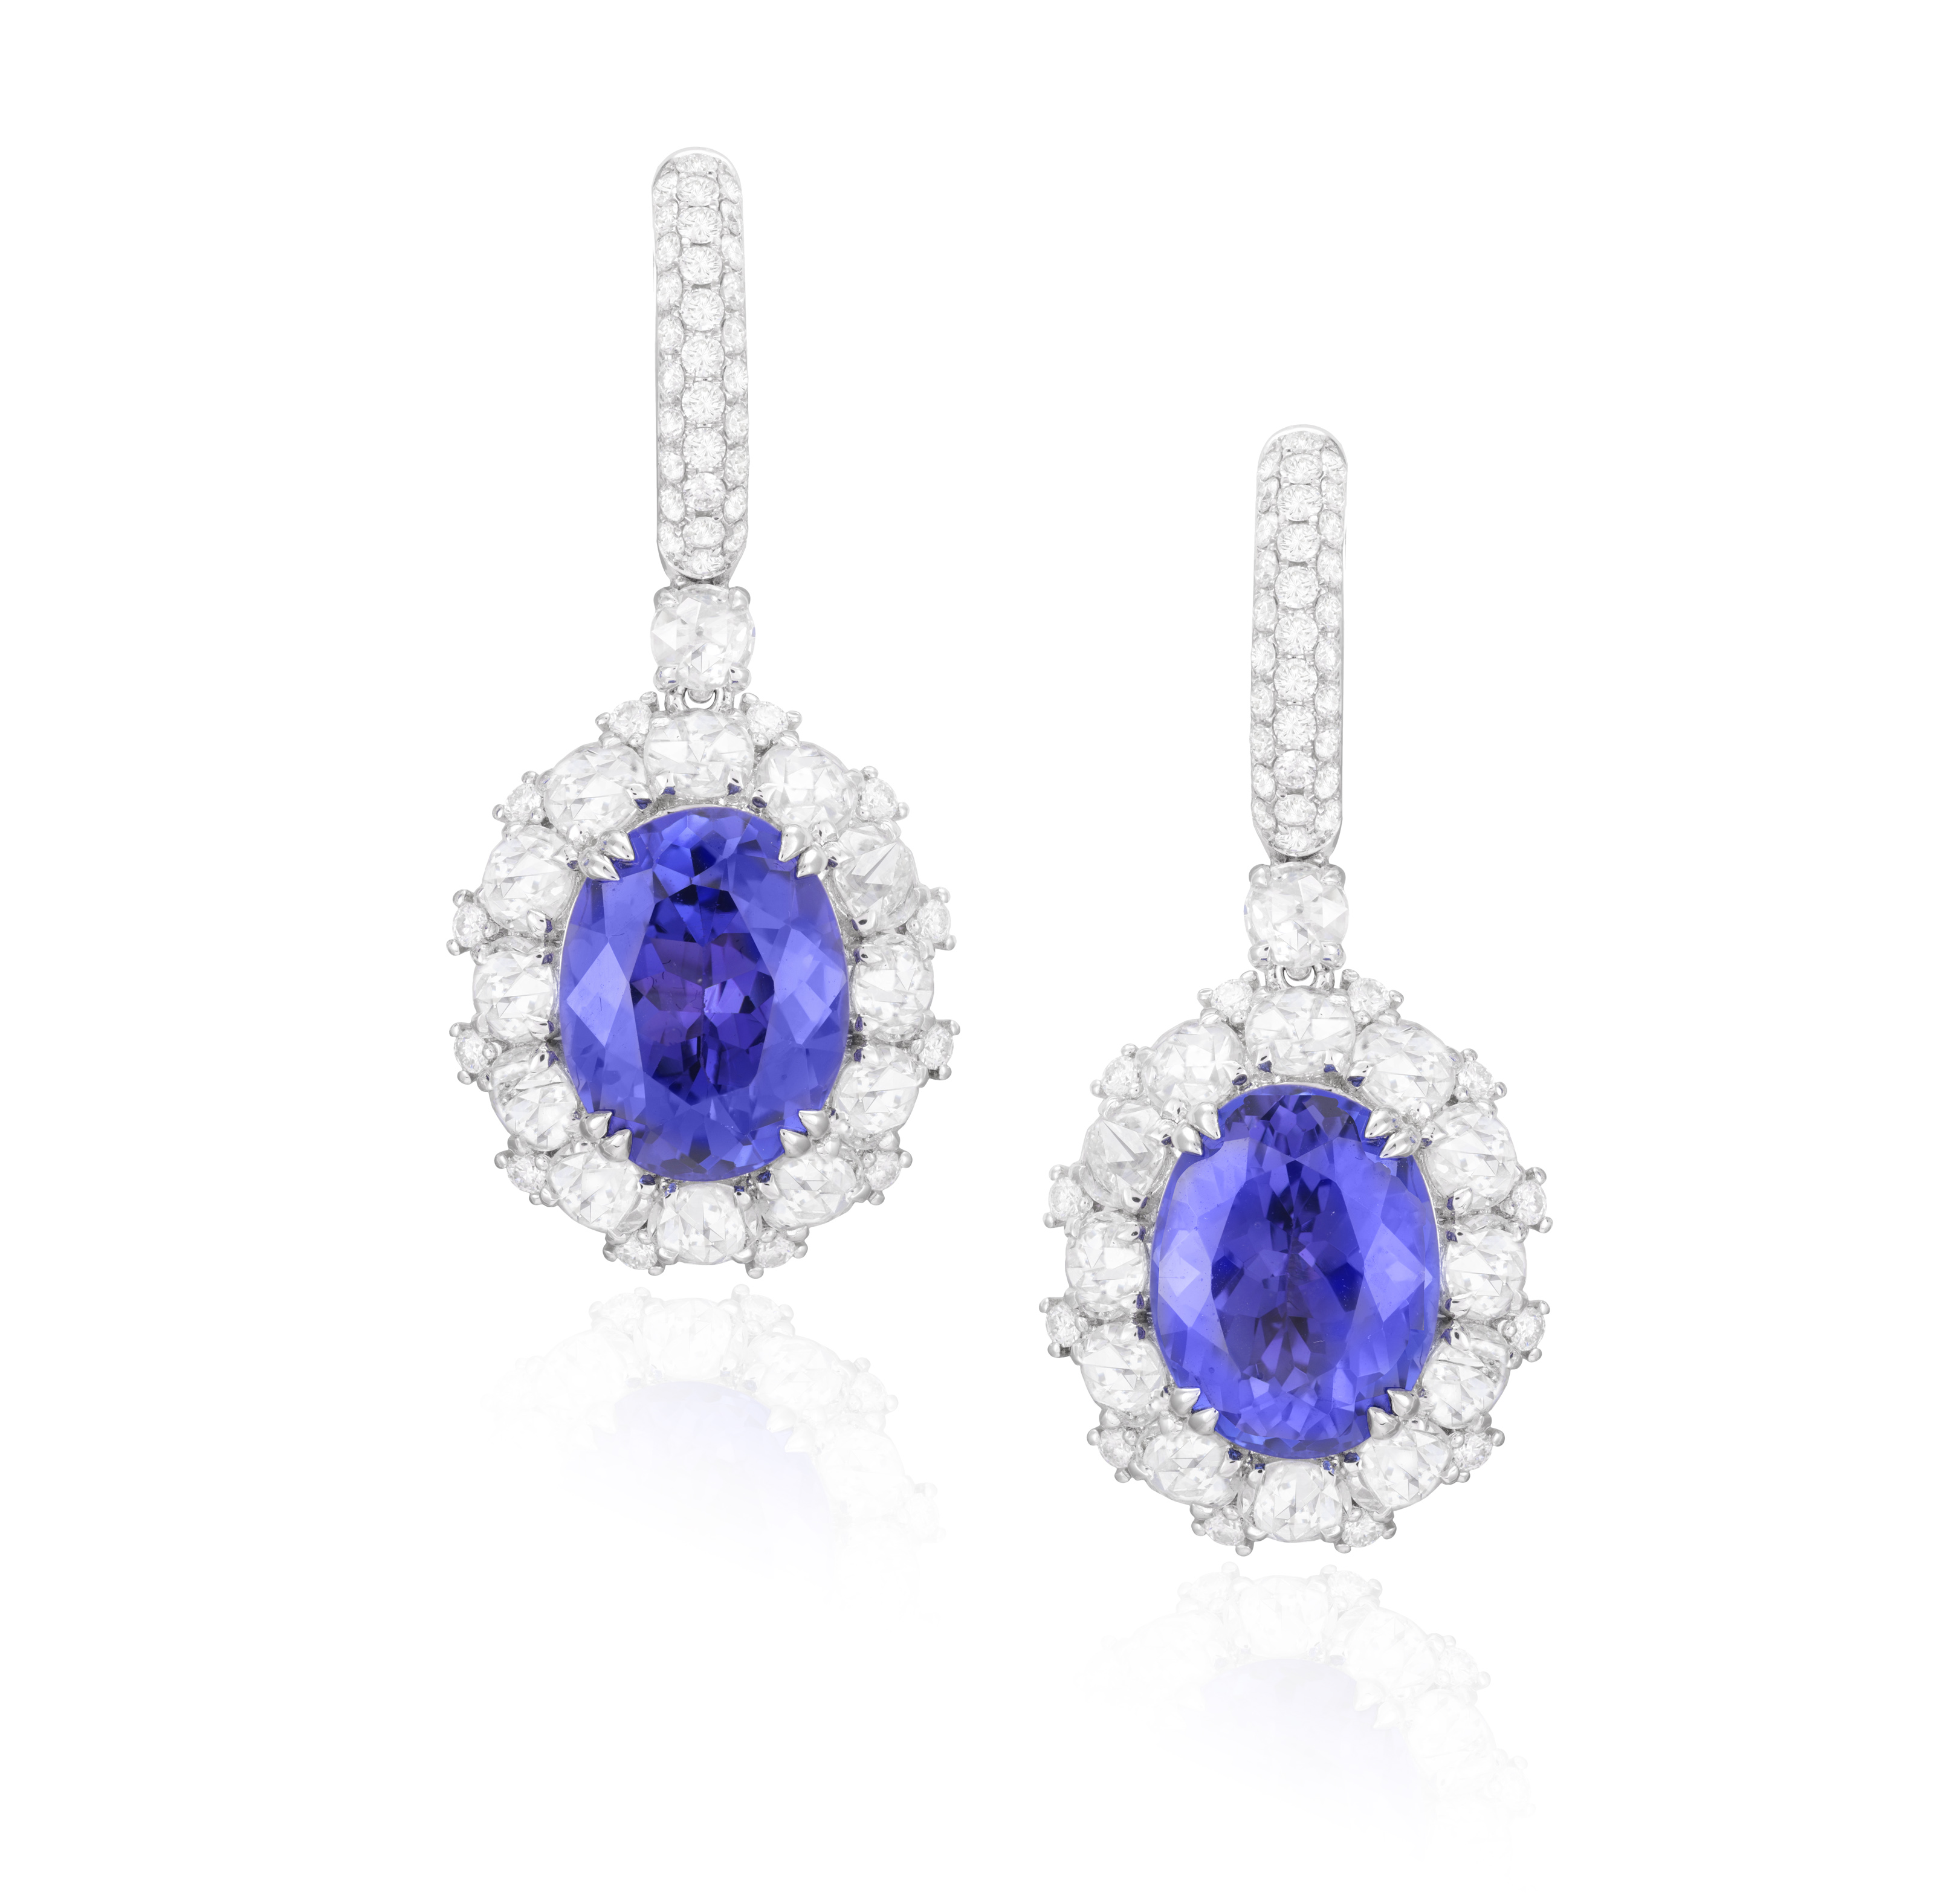 A PAIR OF TANZANITE AND DIAMOND PENDENT EARRINGS Each oval-shaped tanzanite weighing approximately